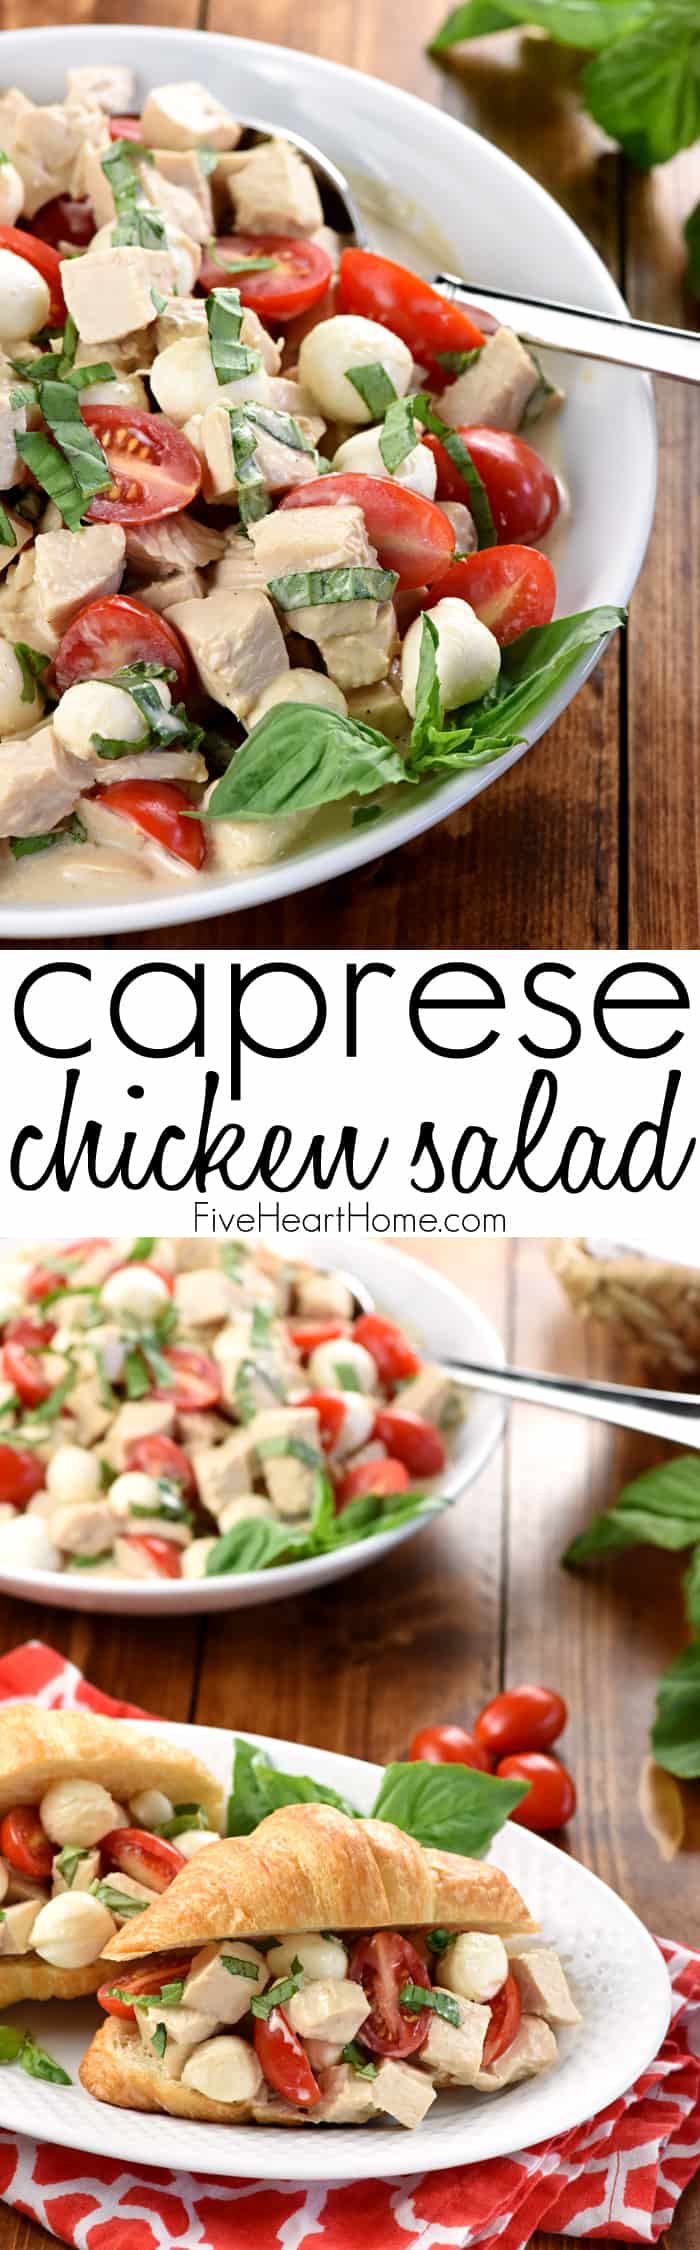 Caprese Chicken Salad ~ combines two summertime favorites, featuring juicy tomatoes, creamy mozzarella, and fresh basil tossed with diced chicken in a homemade, Greek yogurt-based balsamic dressing! | FiveHeartHome.com via @fivehearthome